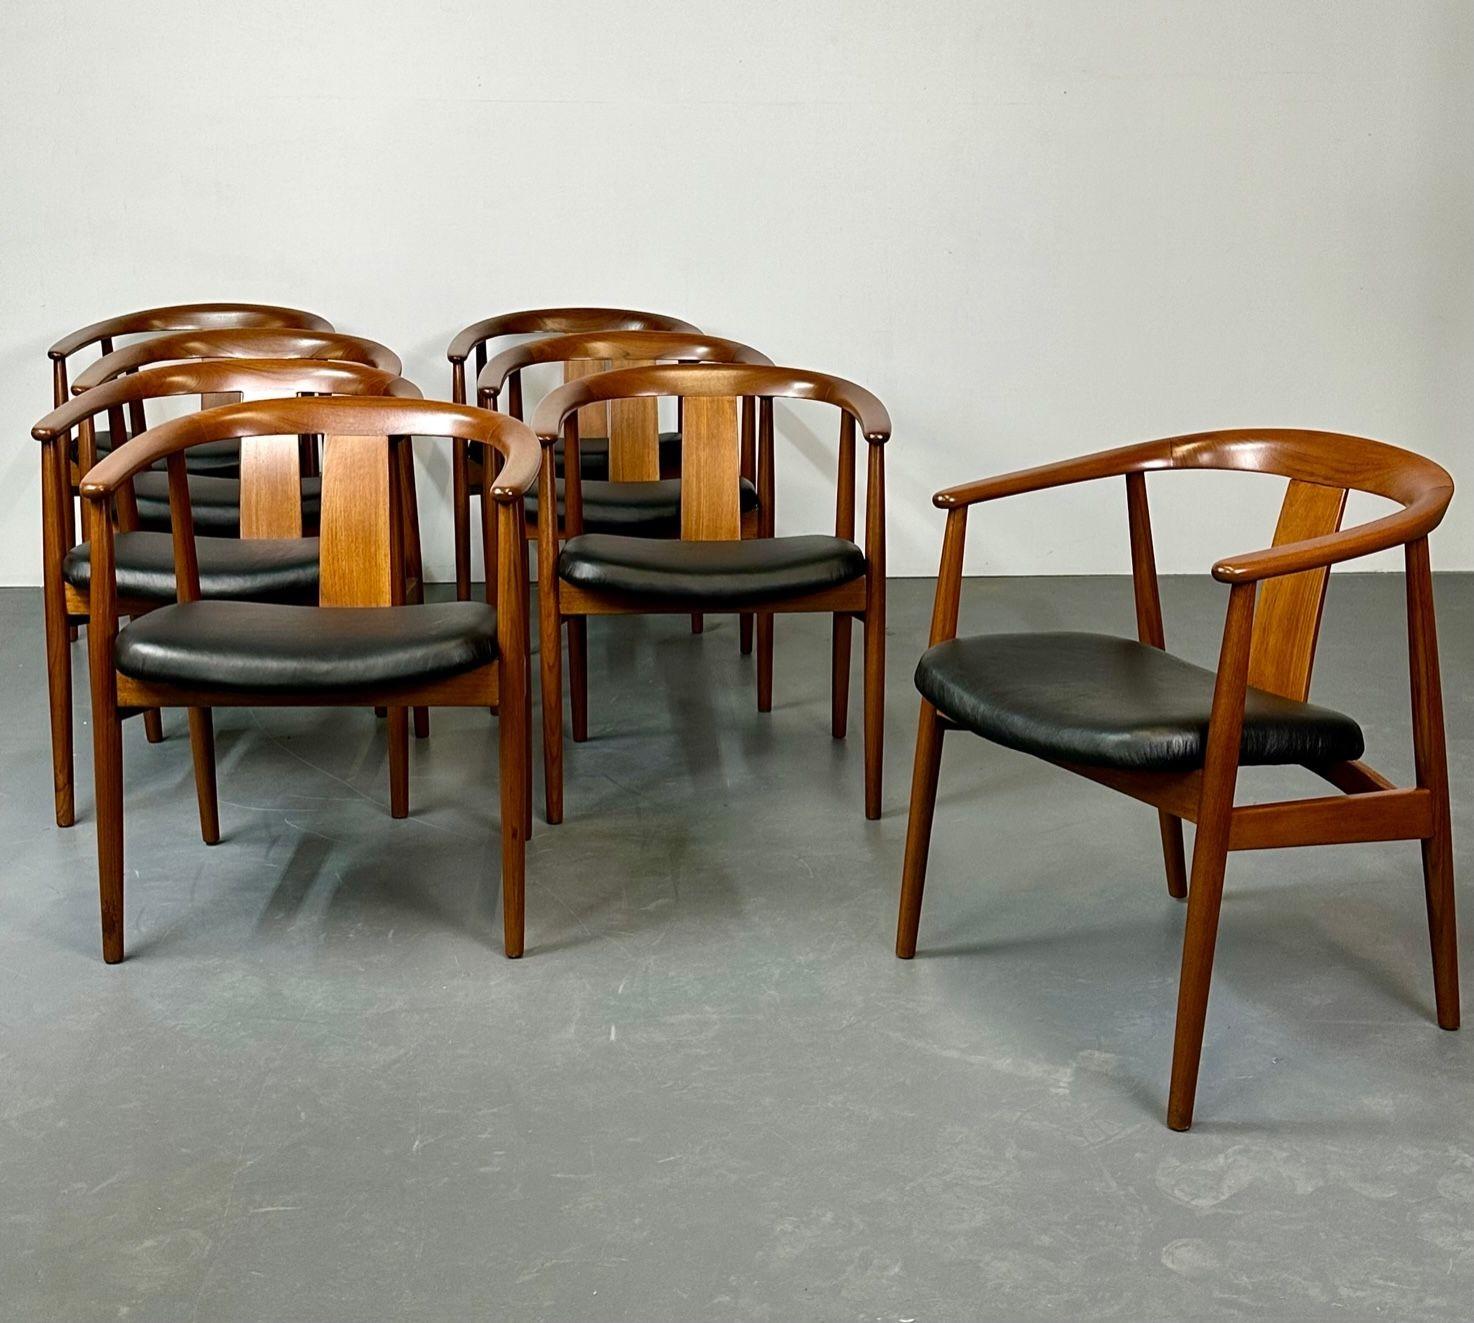 Set of eight Wegner style Mid-Century Modern Danish Designer dining / arm chairs.
 
Set of chic Danish mid-century wishbone style dining chairs with removable leather seats. Chairs have a light polish finish to them. 
 
Other Scandinavian